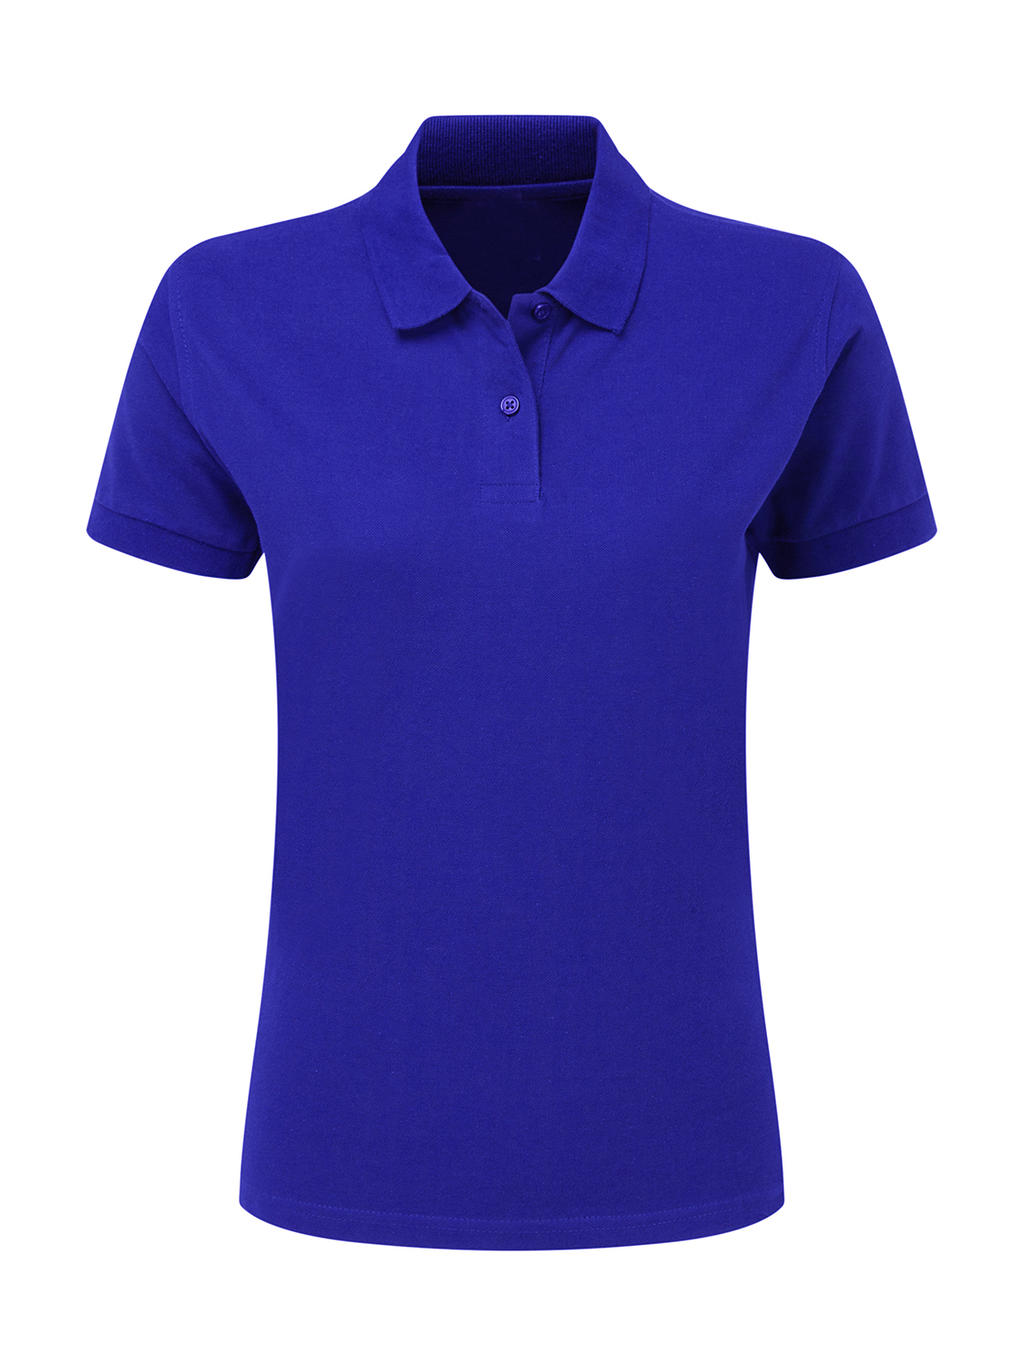  Ladies Cotton Polo in Farbe Royal Blue